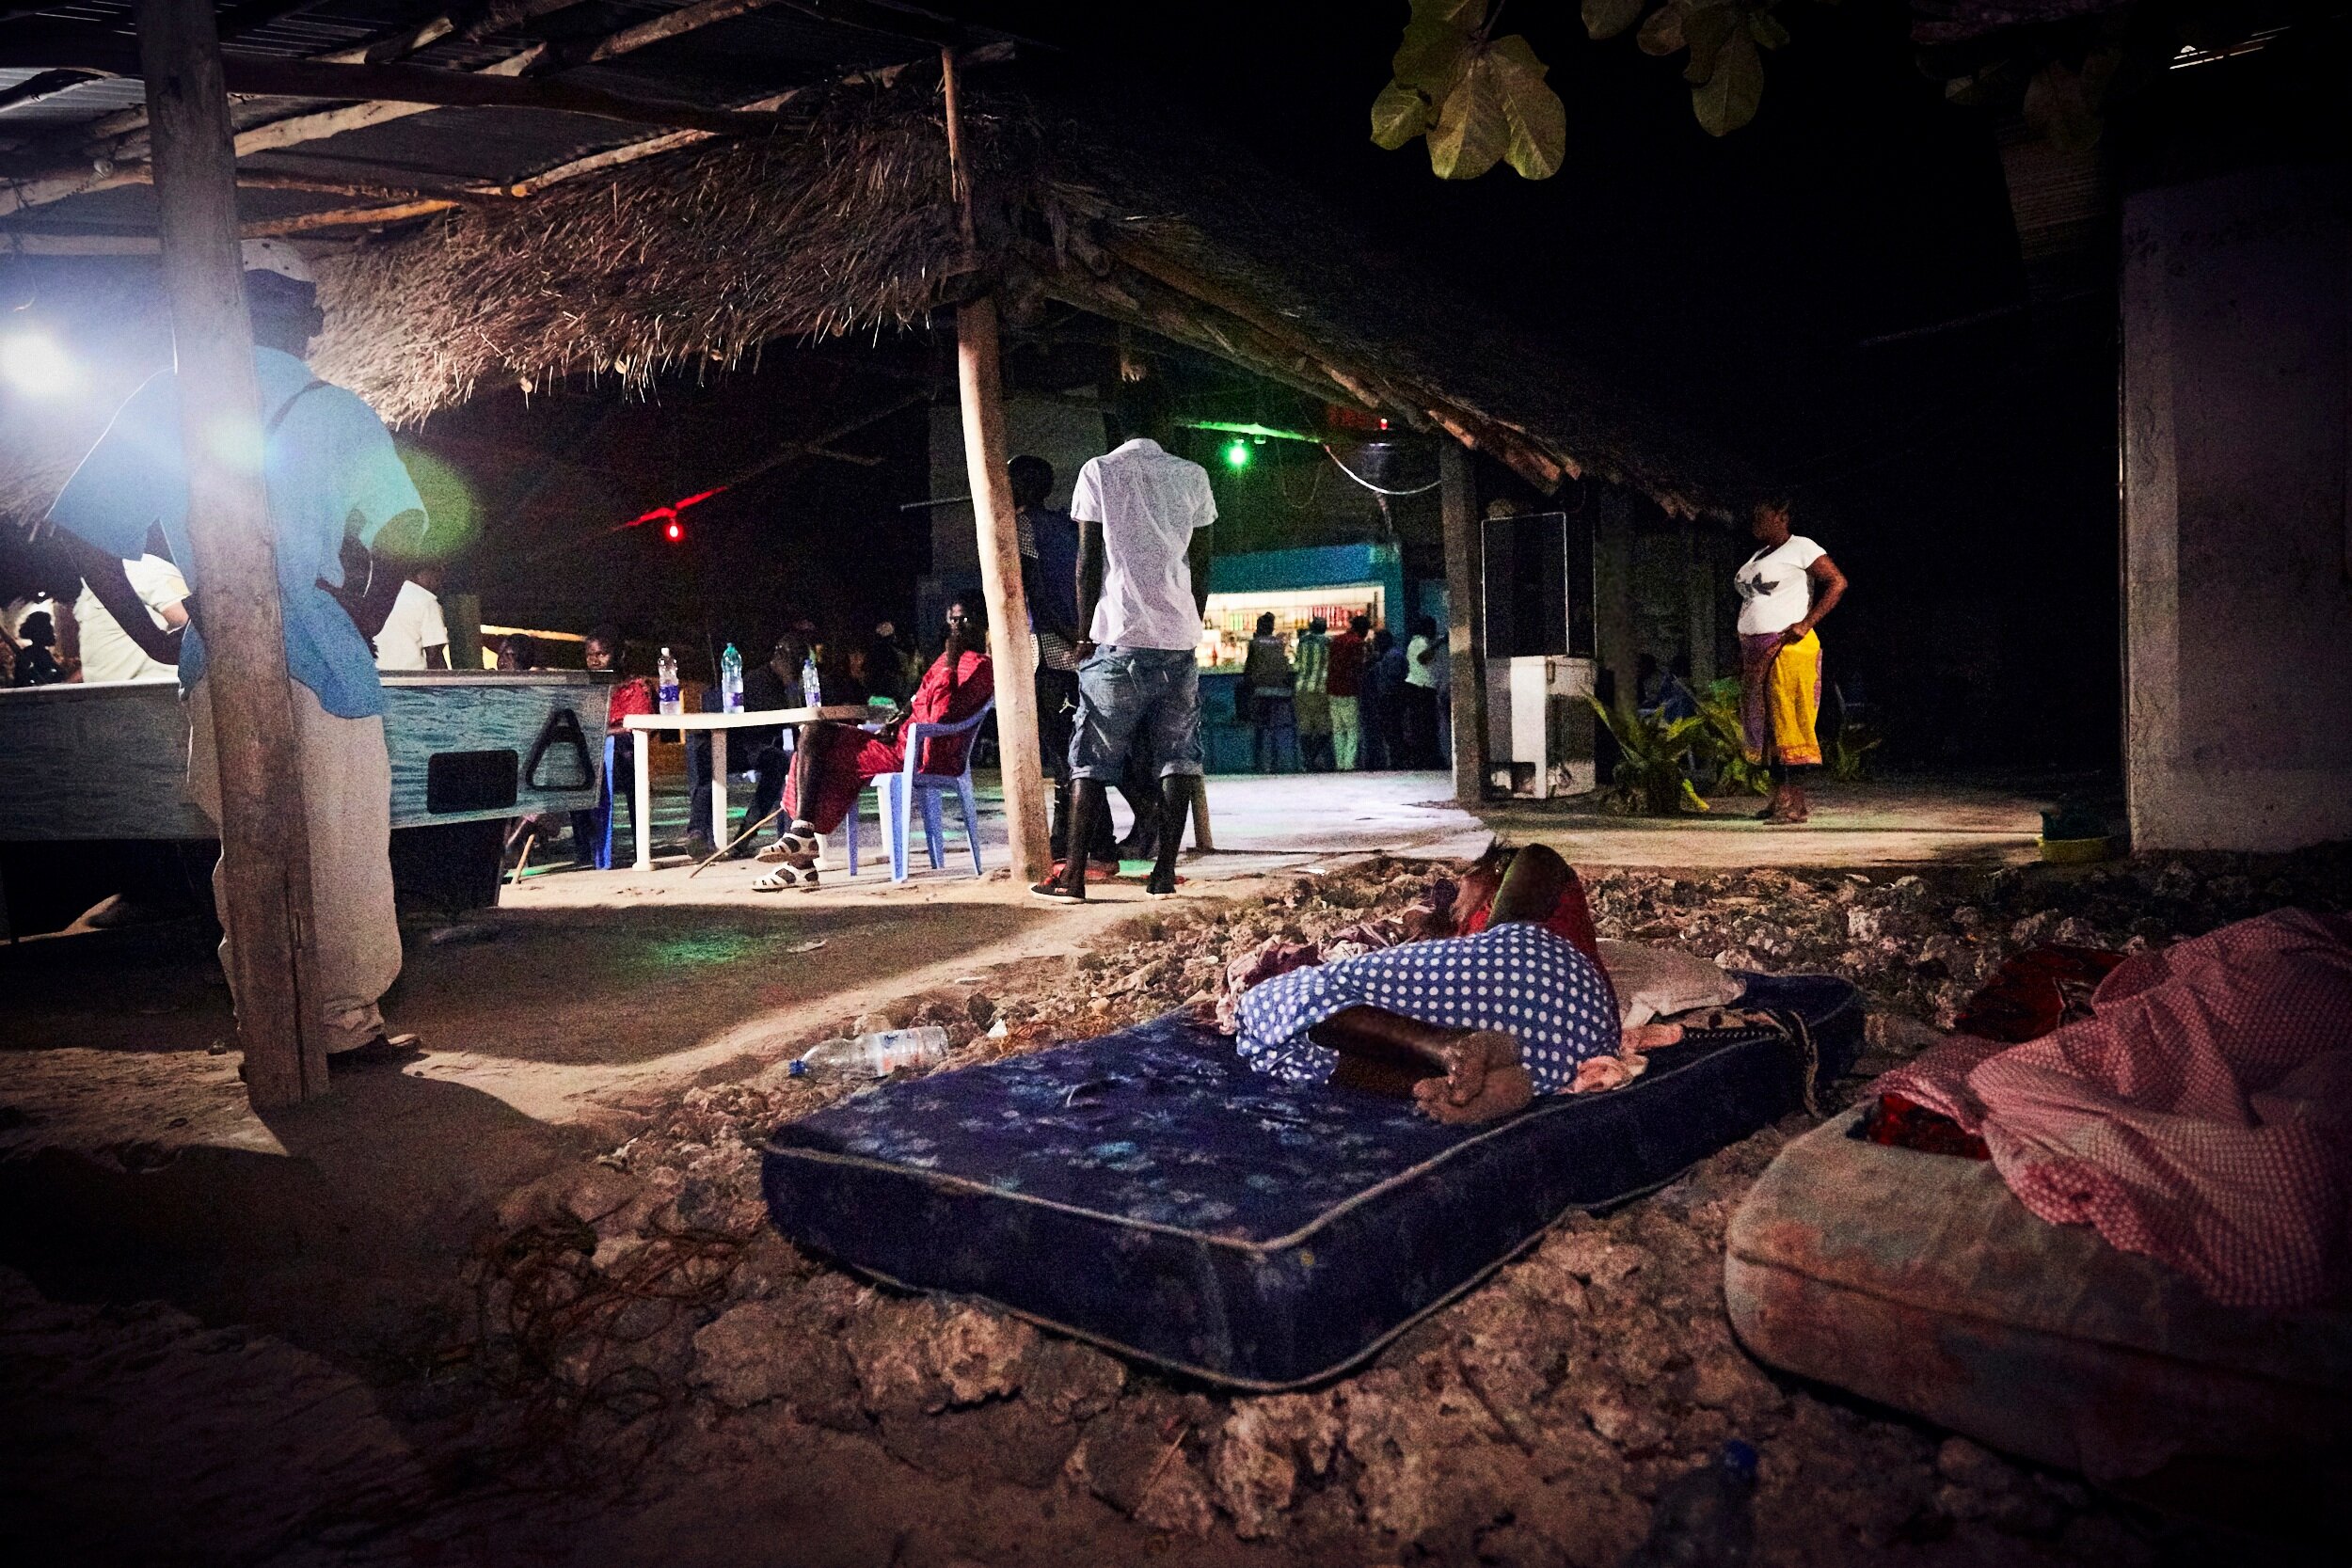  On a slow night, the women have dragged their sleeping mattresses outside, hoping to catch a breeze in Zanzibar's 90+ degree weather. 